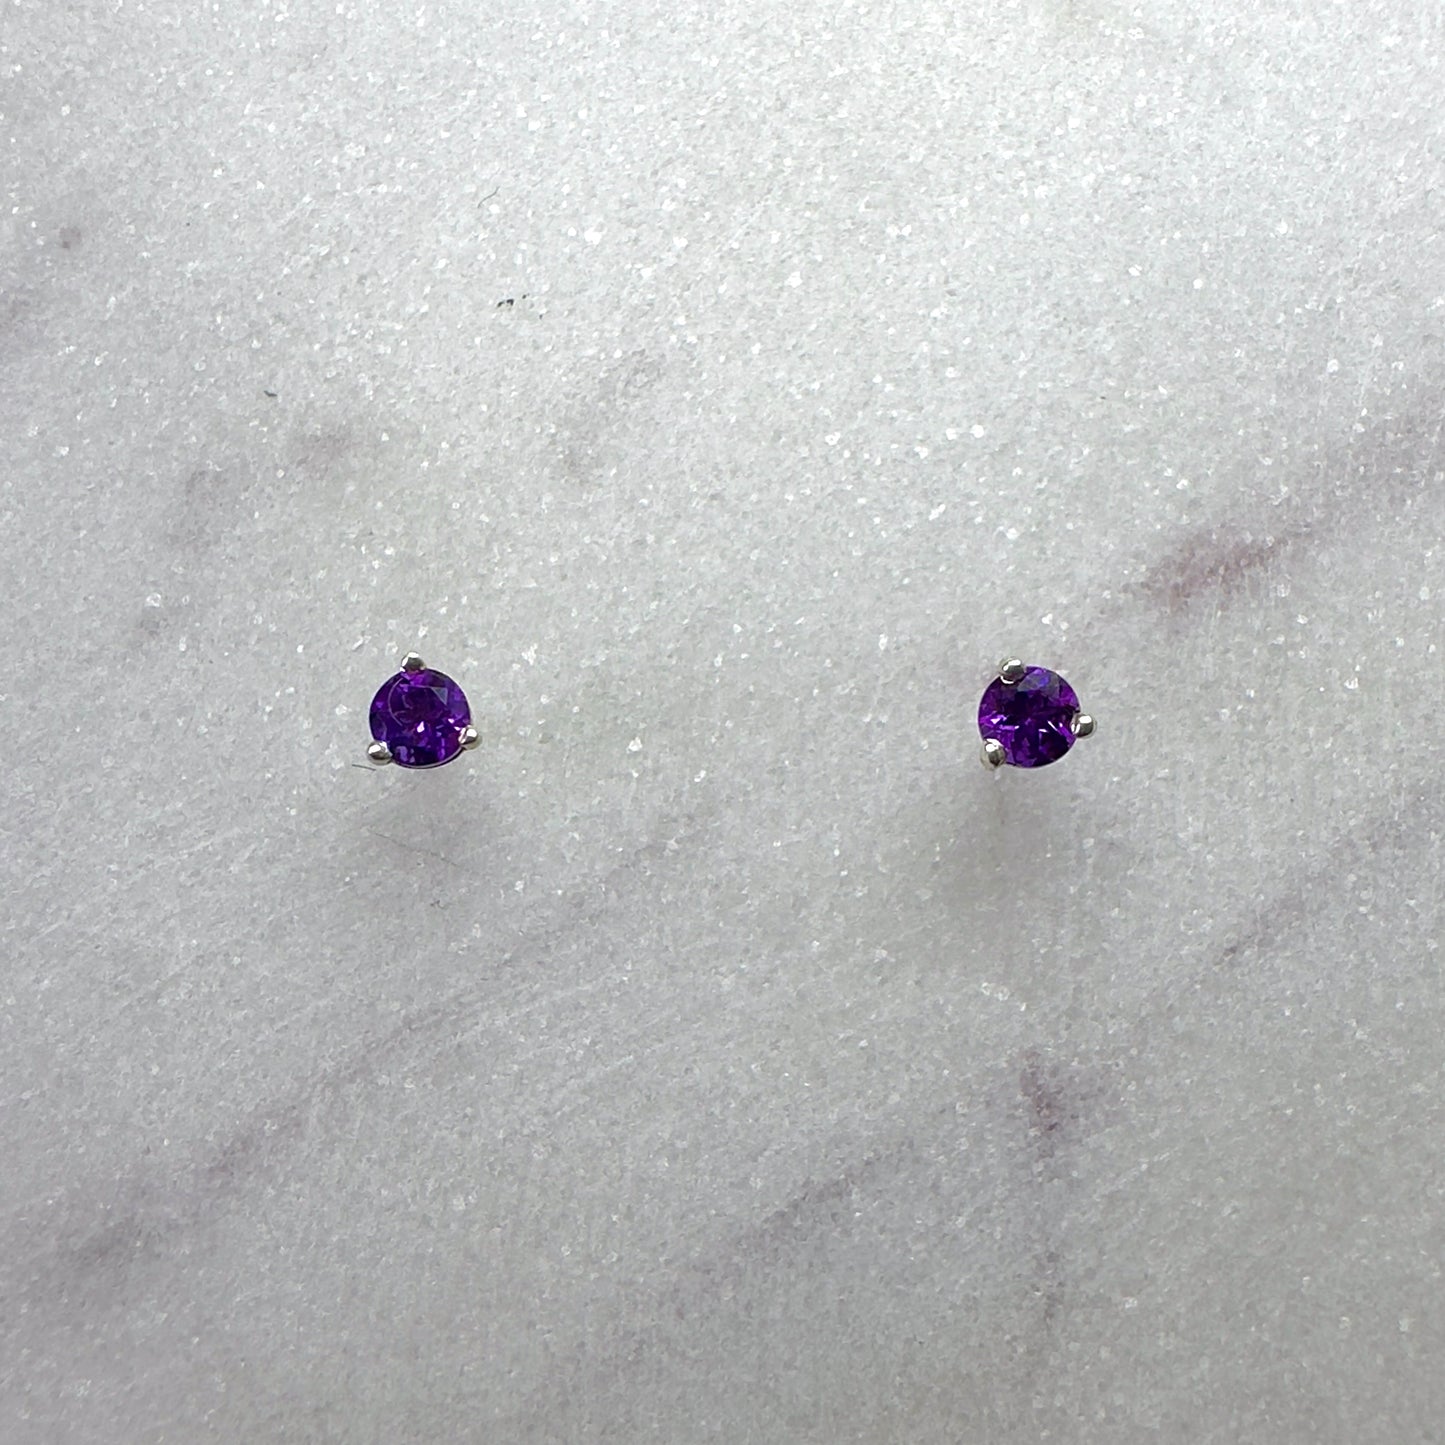 Gemstone Stud Earring: 3 Prong ‘Cocktail’ Style Setting